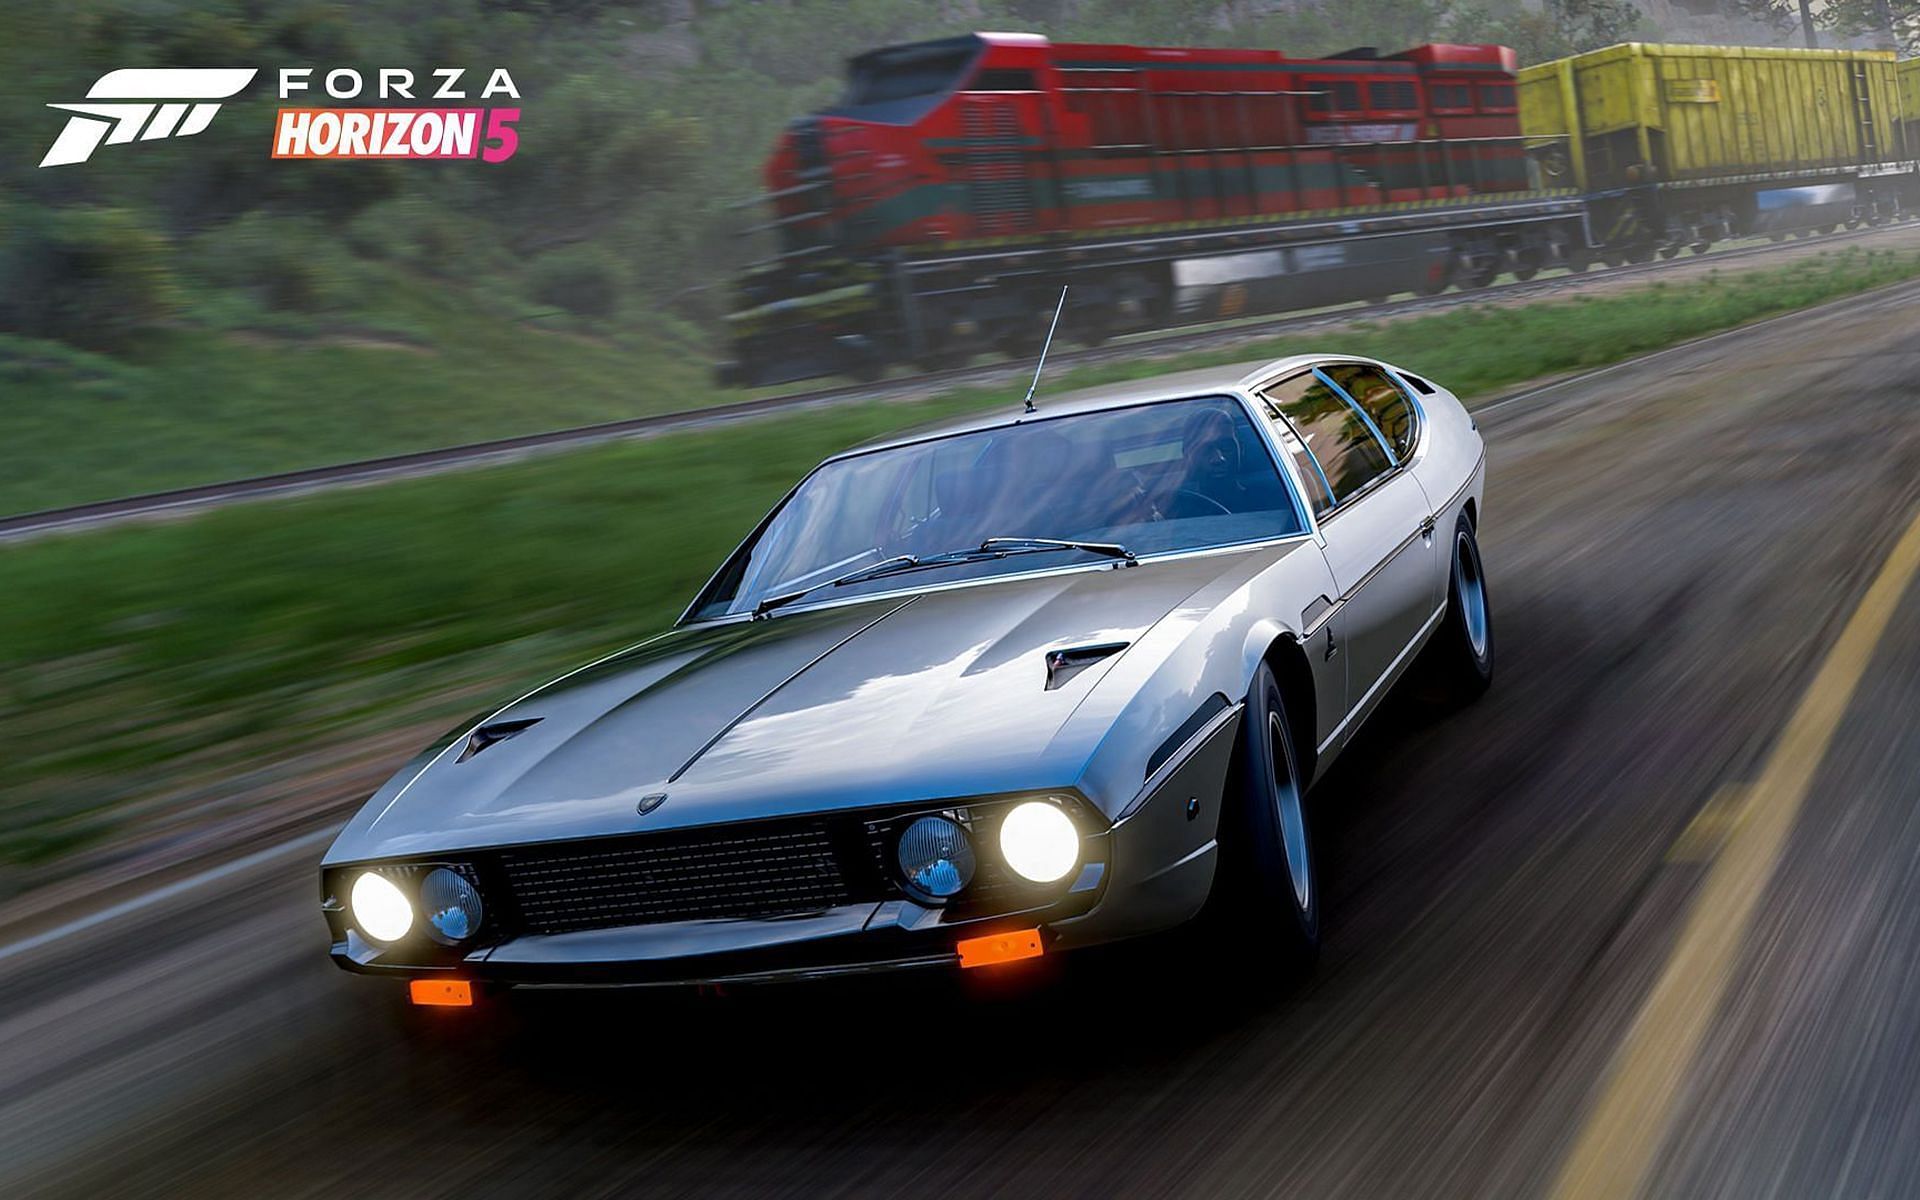 Forza Horizon 5 Series 3 brings a lot of challenges and rewards for fans (Image via Playground Games)